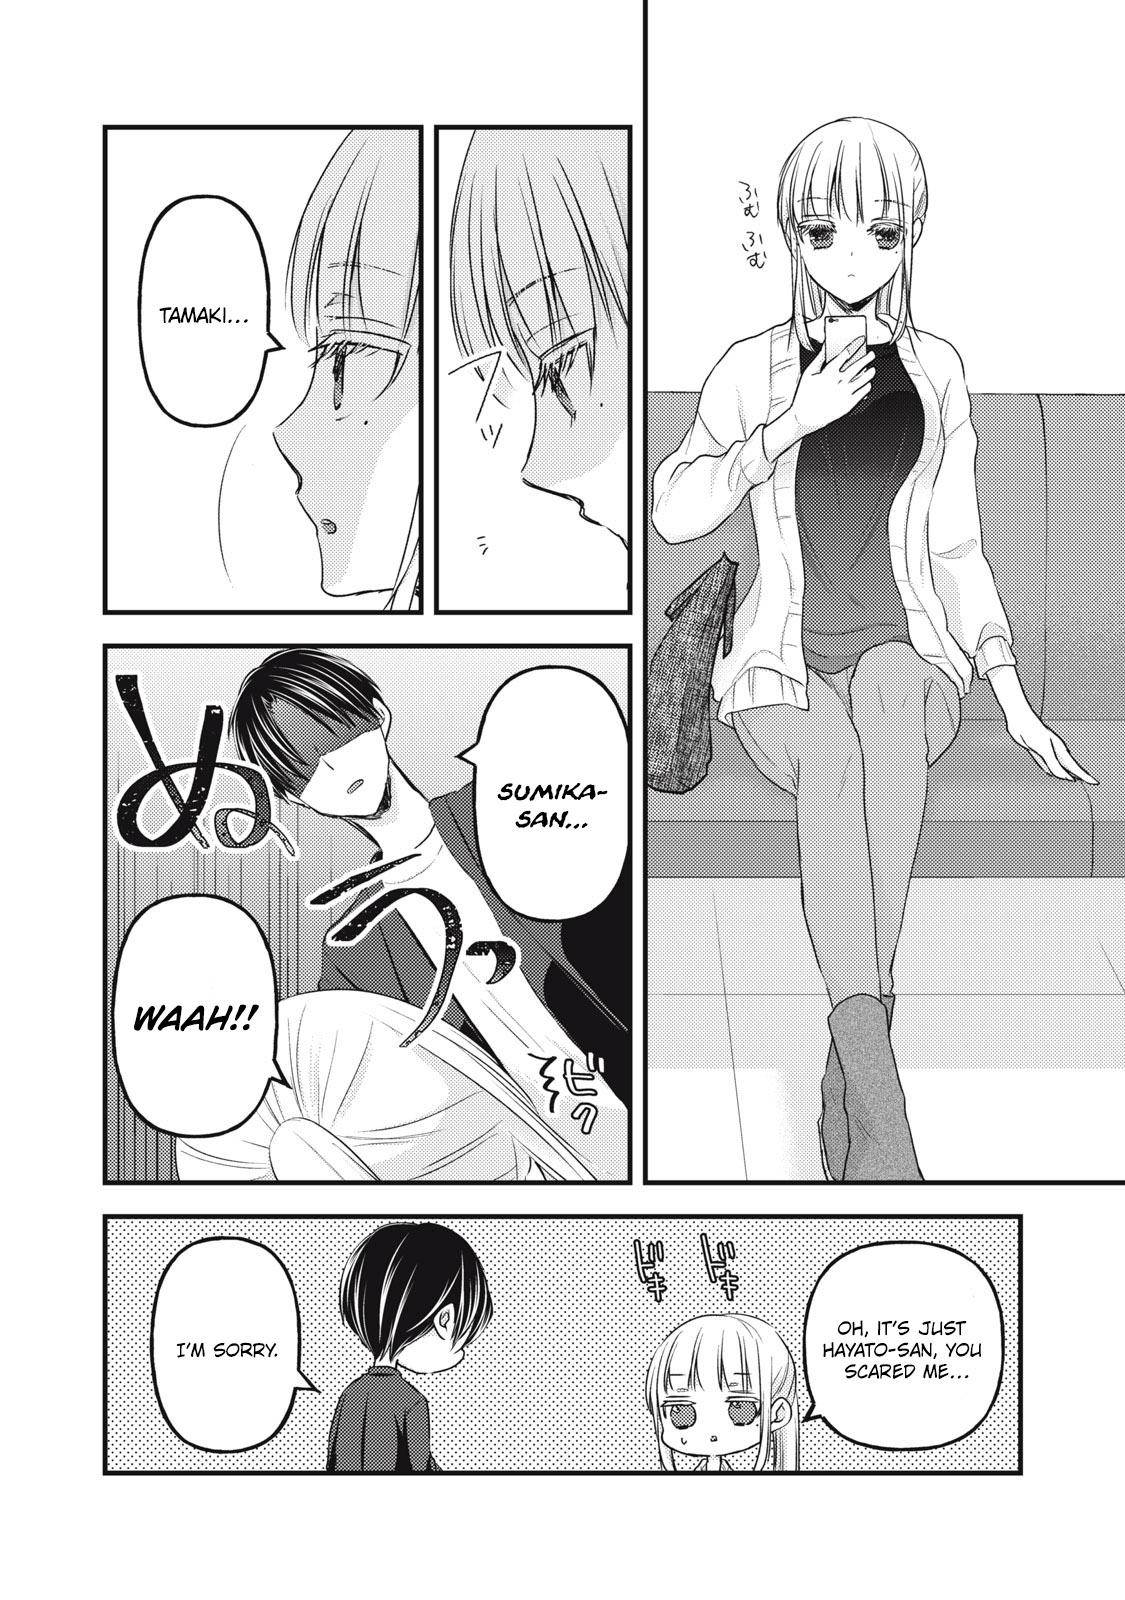 We May Be an Inexperienced Couple but... chapter 93 page 5